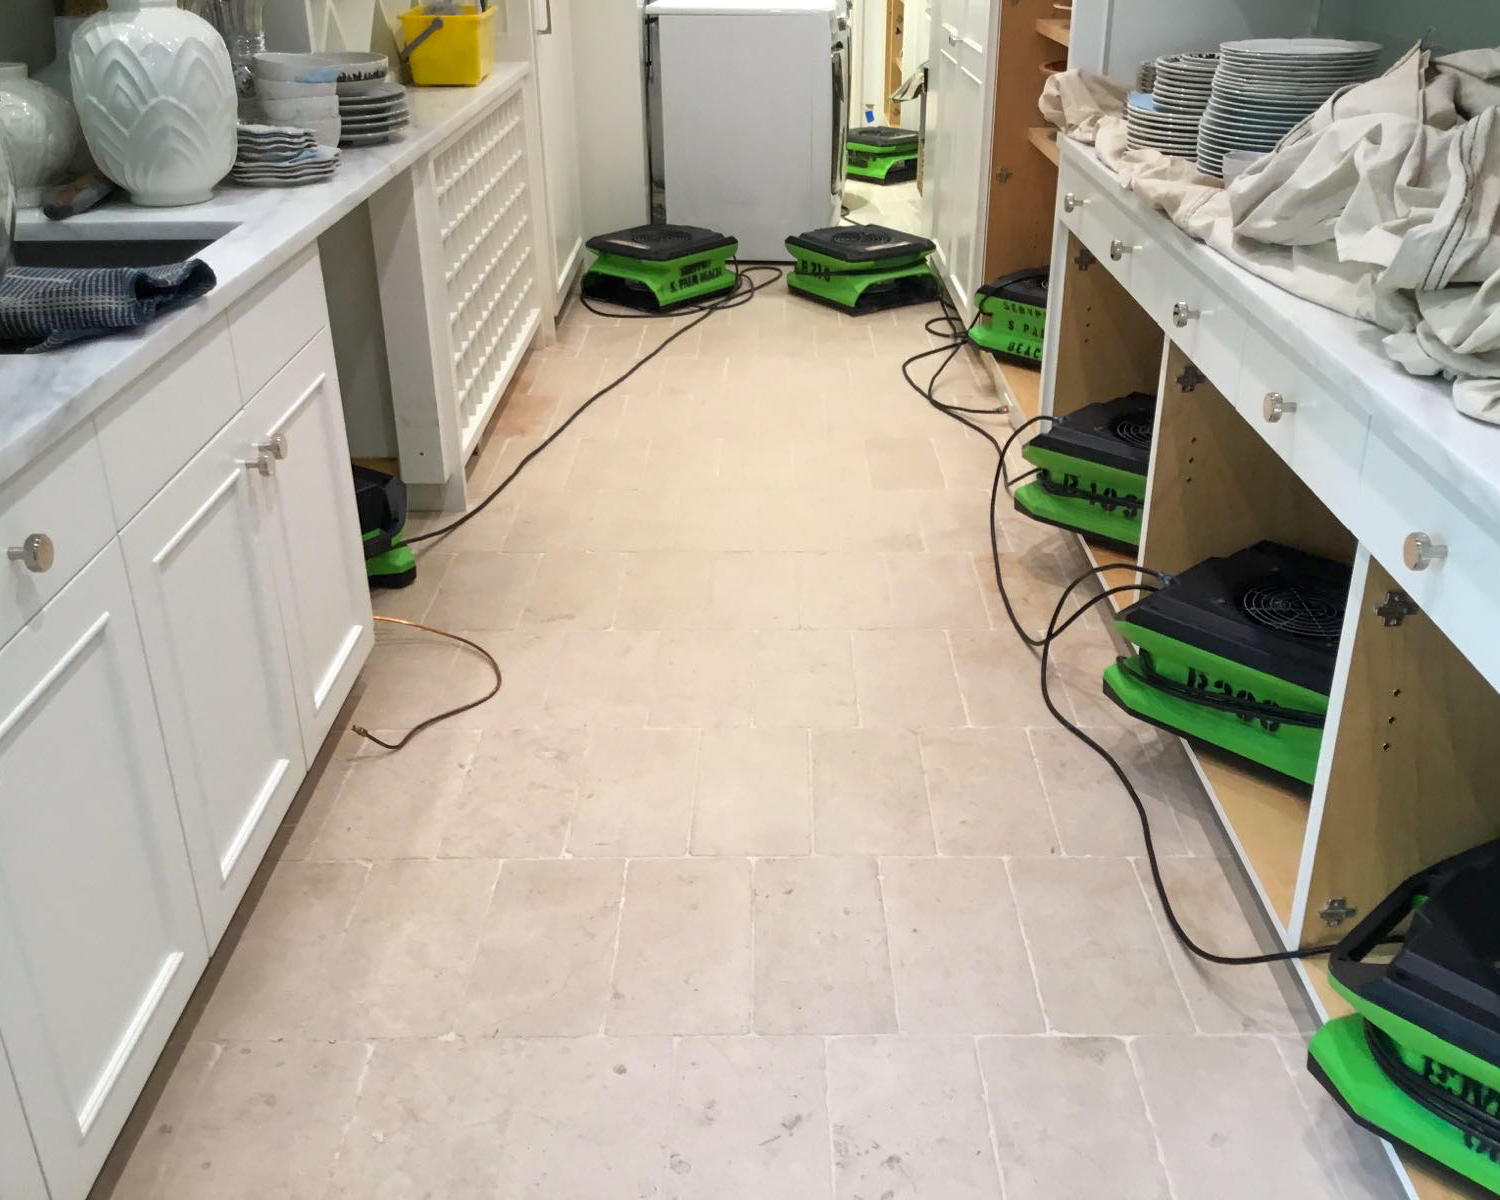 SERVPRO of South Palm Beach understands how upsetting it can be when dealing with a water damage in your Boca Raton home or office.